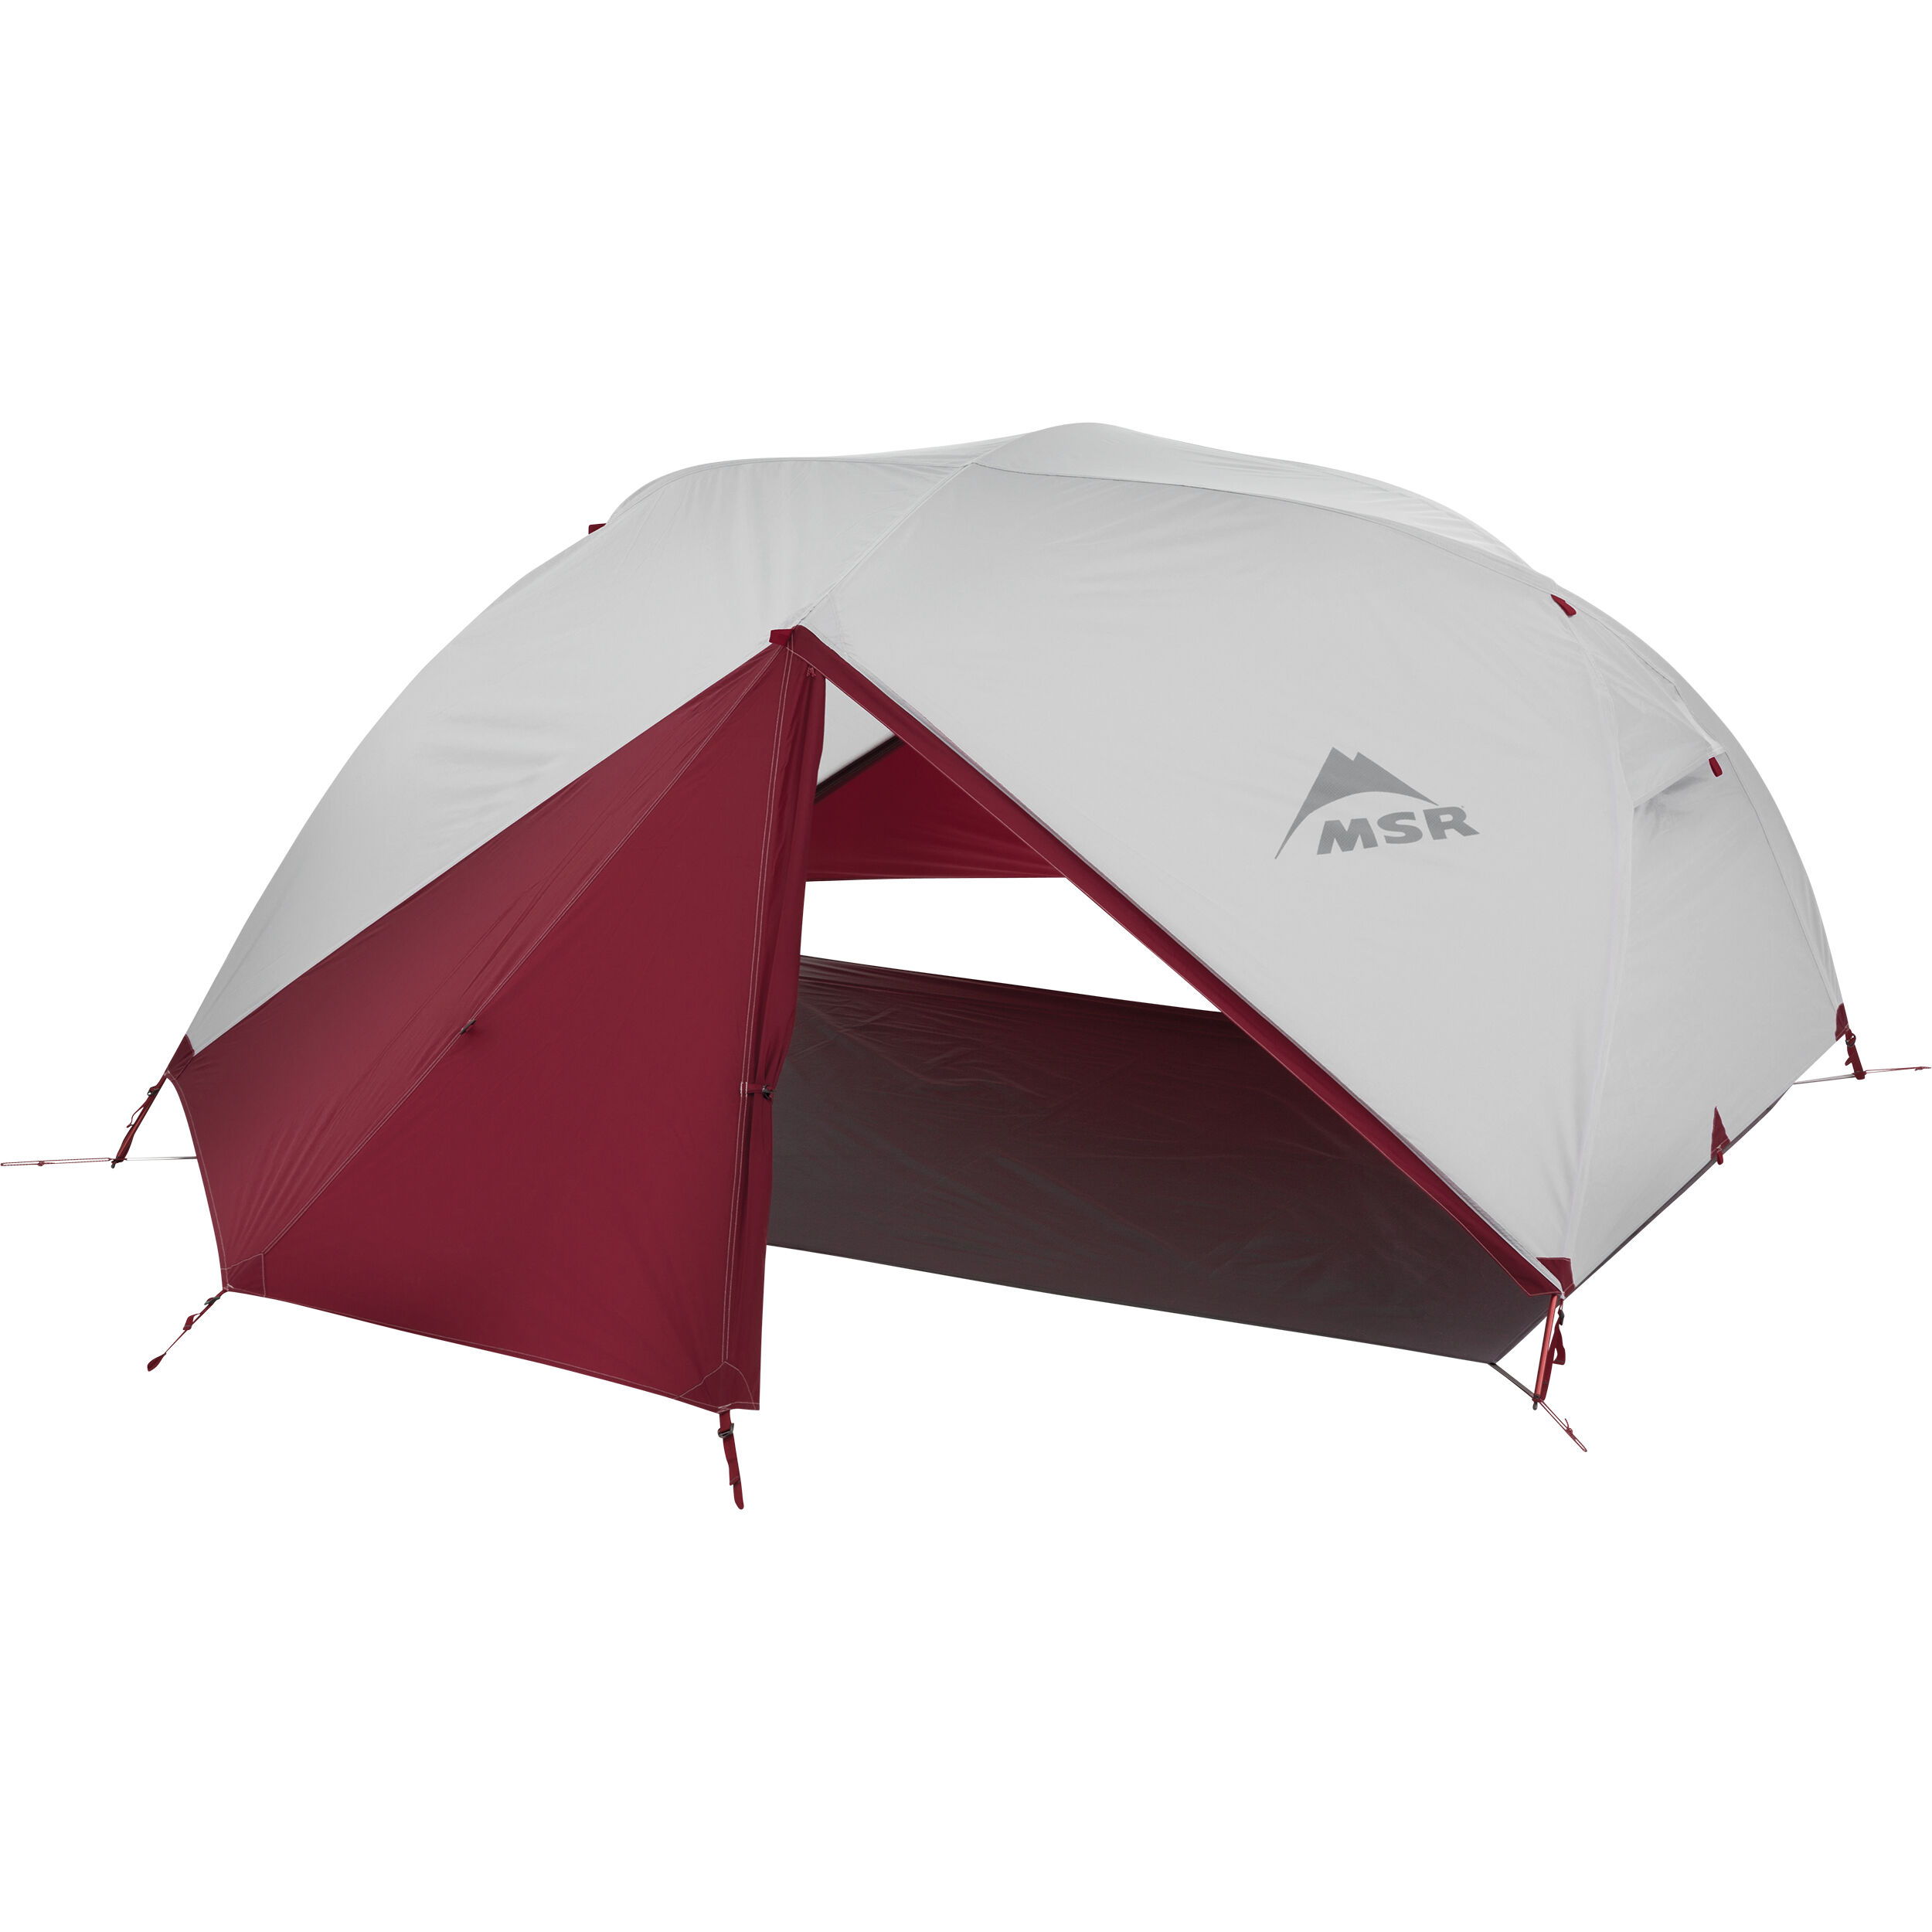 Elixir™ 3 Extra Roomy 3-Person Backpacking Tent | MSR®